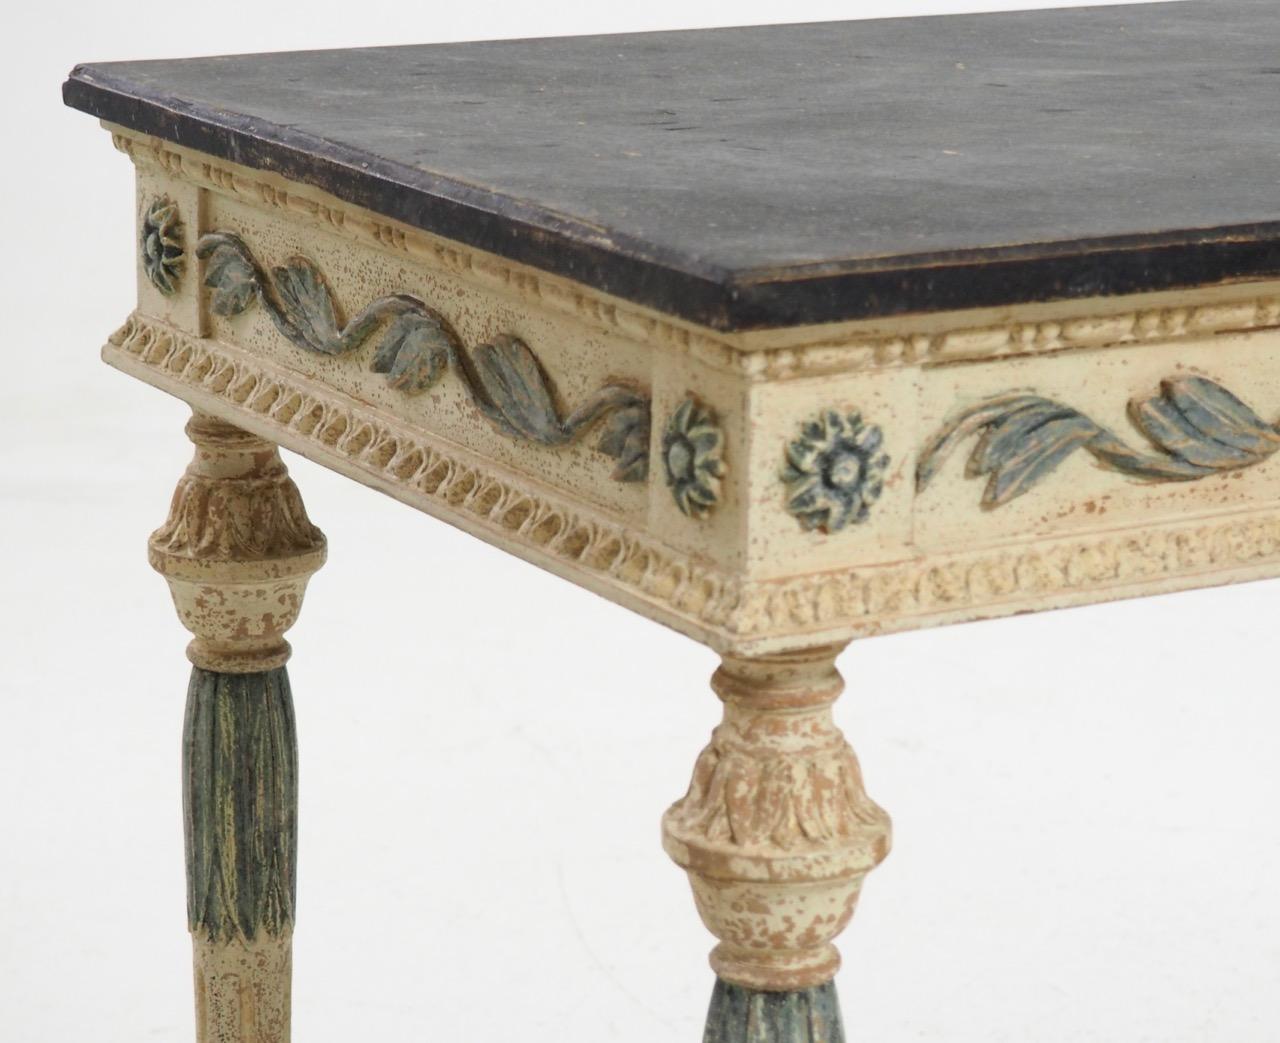 Very stunning, decorative and rare freestanding console table, scraped down to original paint, richly carved, circa 1820.